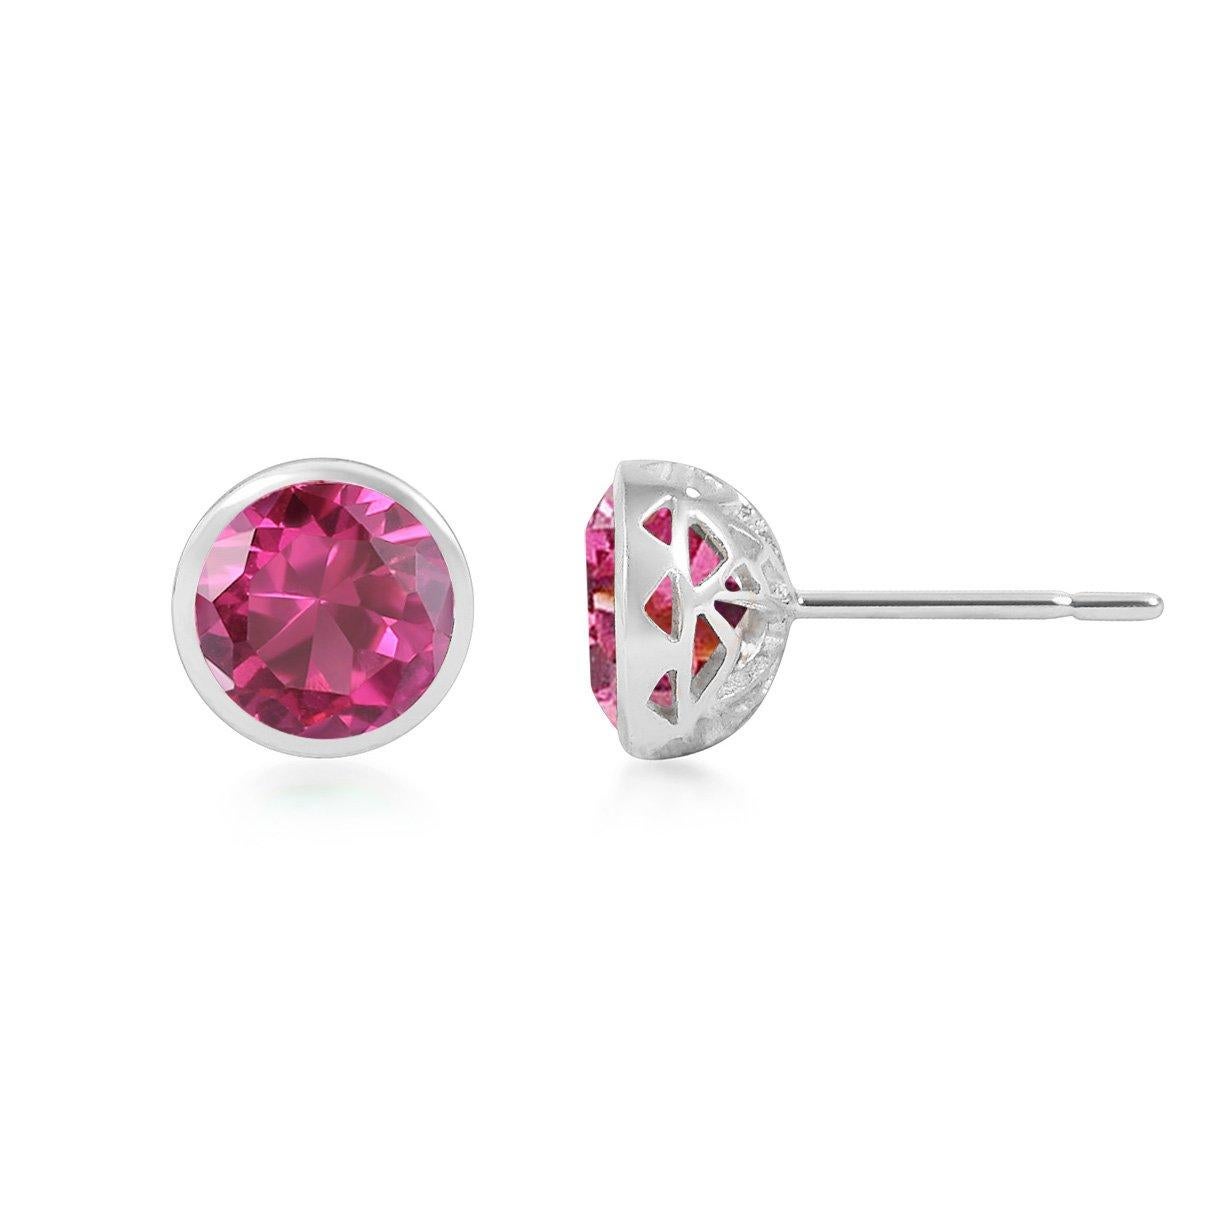 Handcrafted 2.60 Carats Pink Tourmaline 18 Karat White Gold Stud Earrings. The 8mm natural stones are set in our iconic hand pierced gold lace to let the light through our precious and fine stones our earrings are the perfect everyday